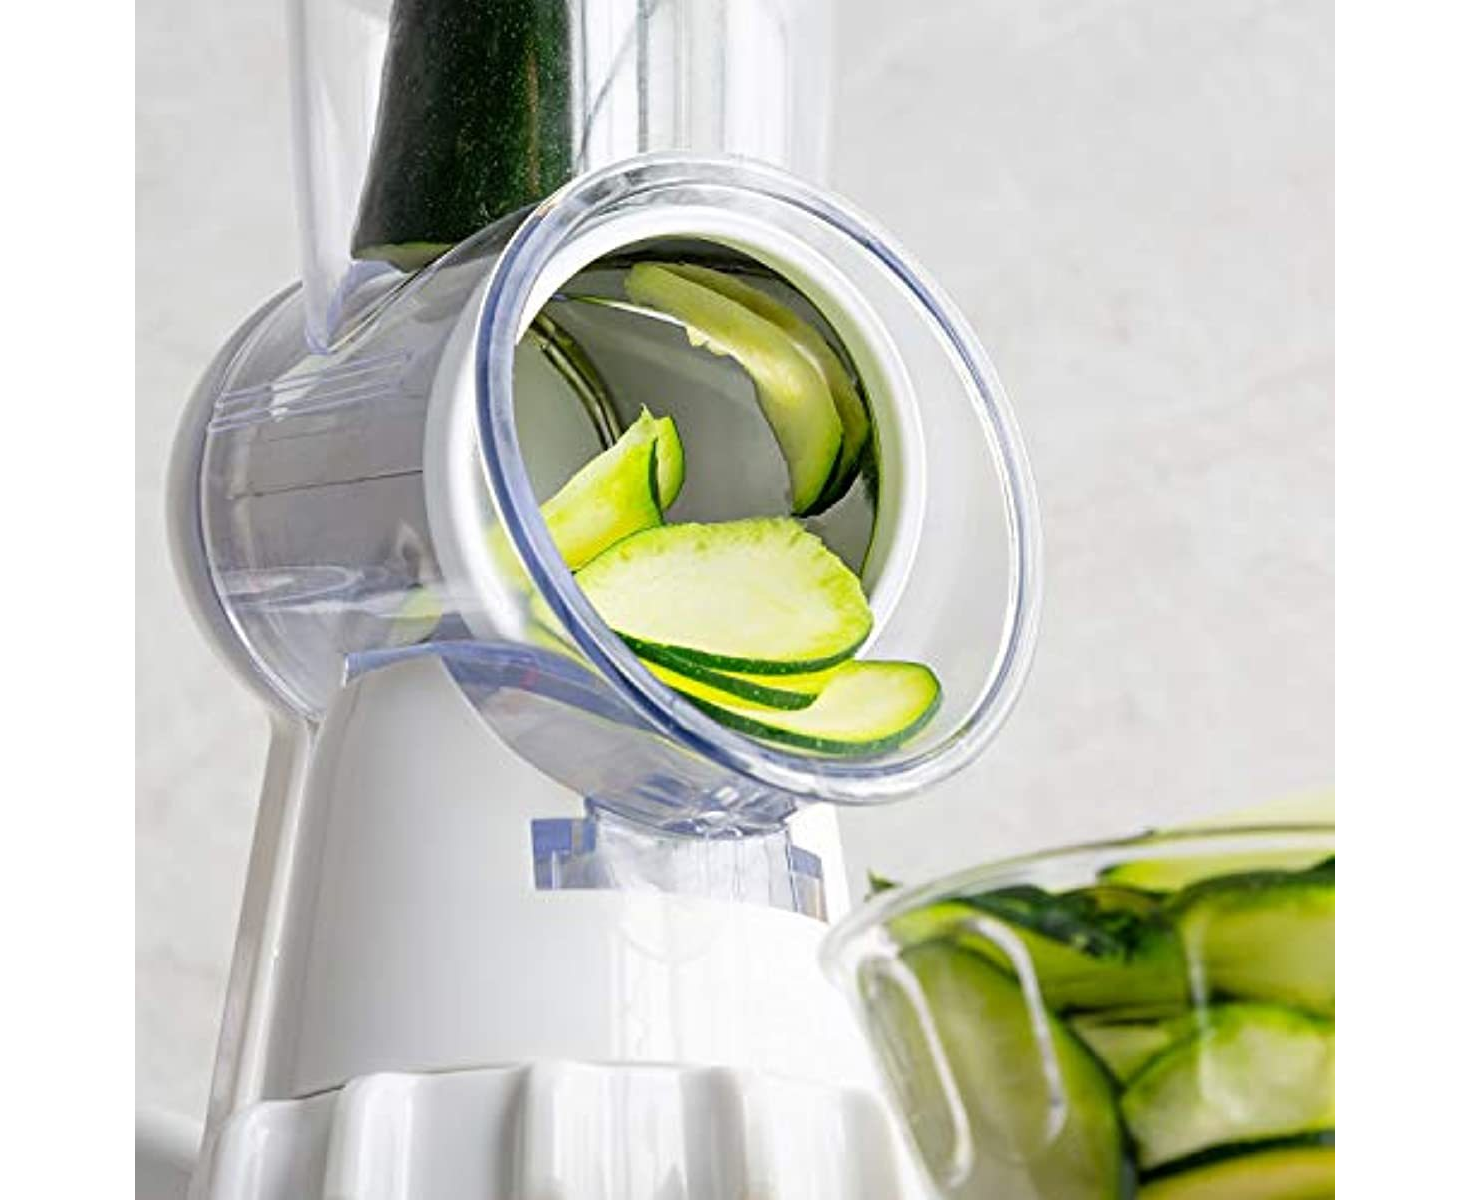 Vegetable Cutter Sumo Slicer With 3 Interchangeable Drums